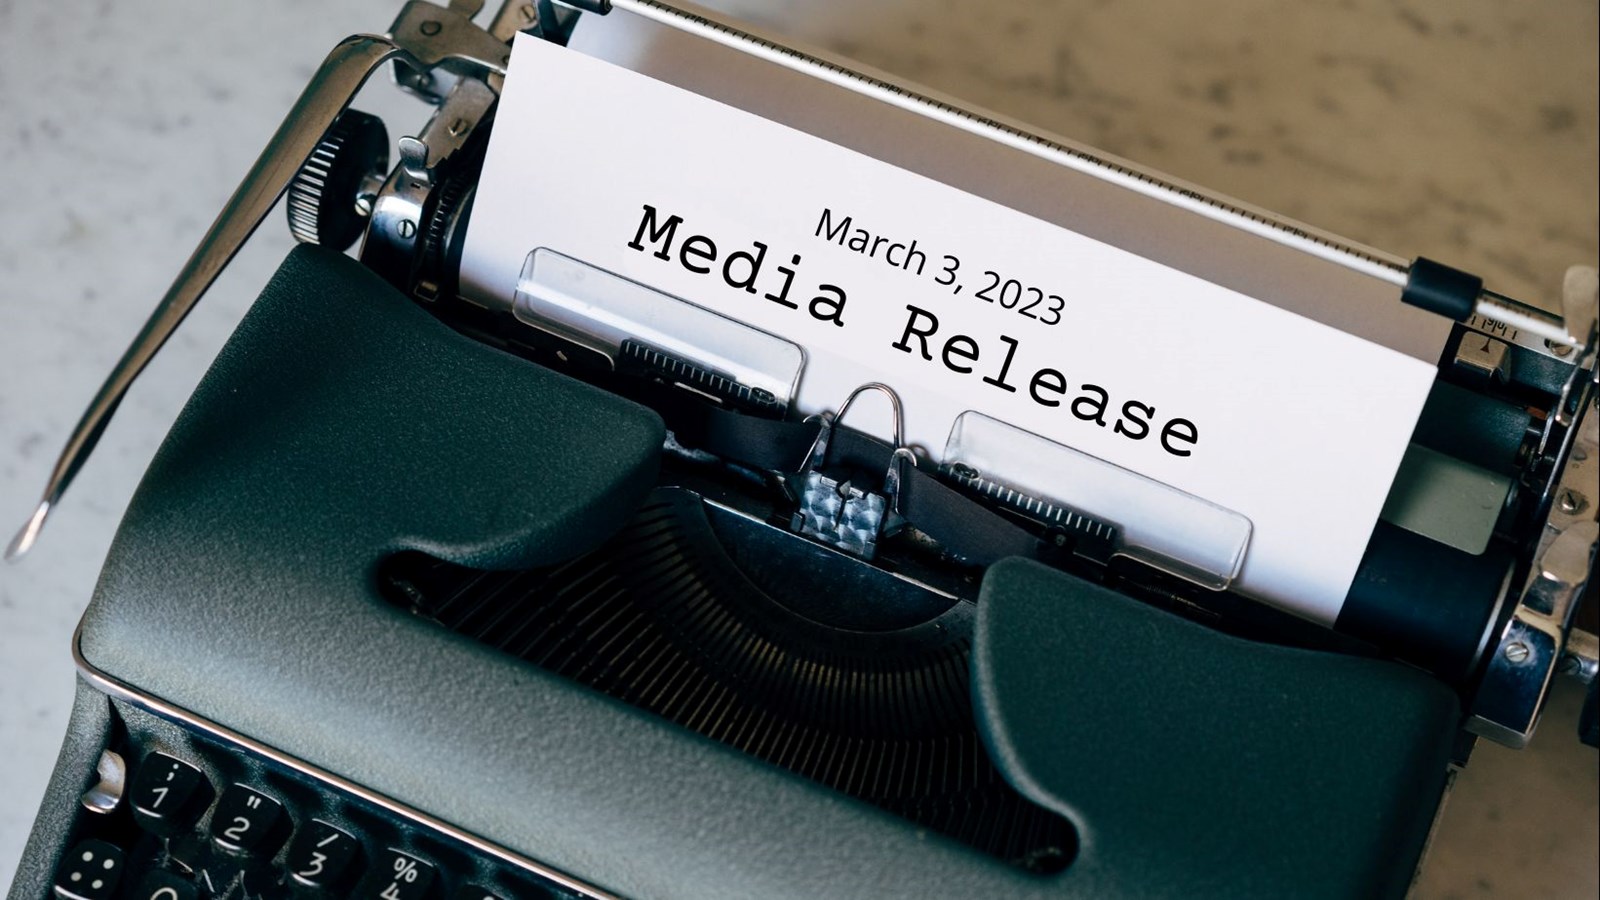 Media Release - March 3, 2023